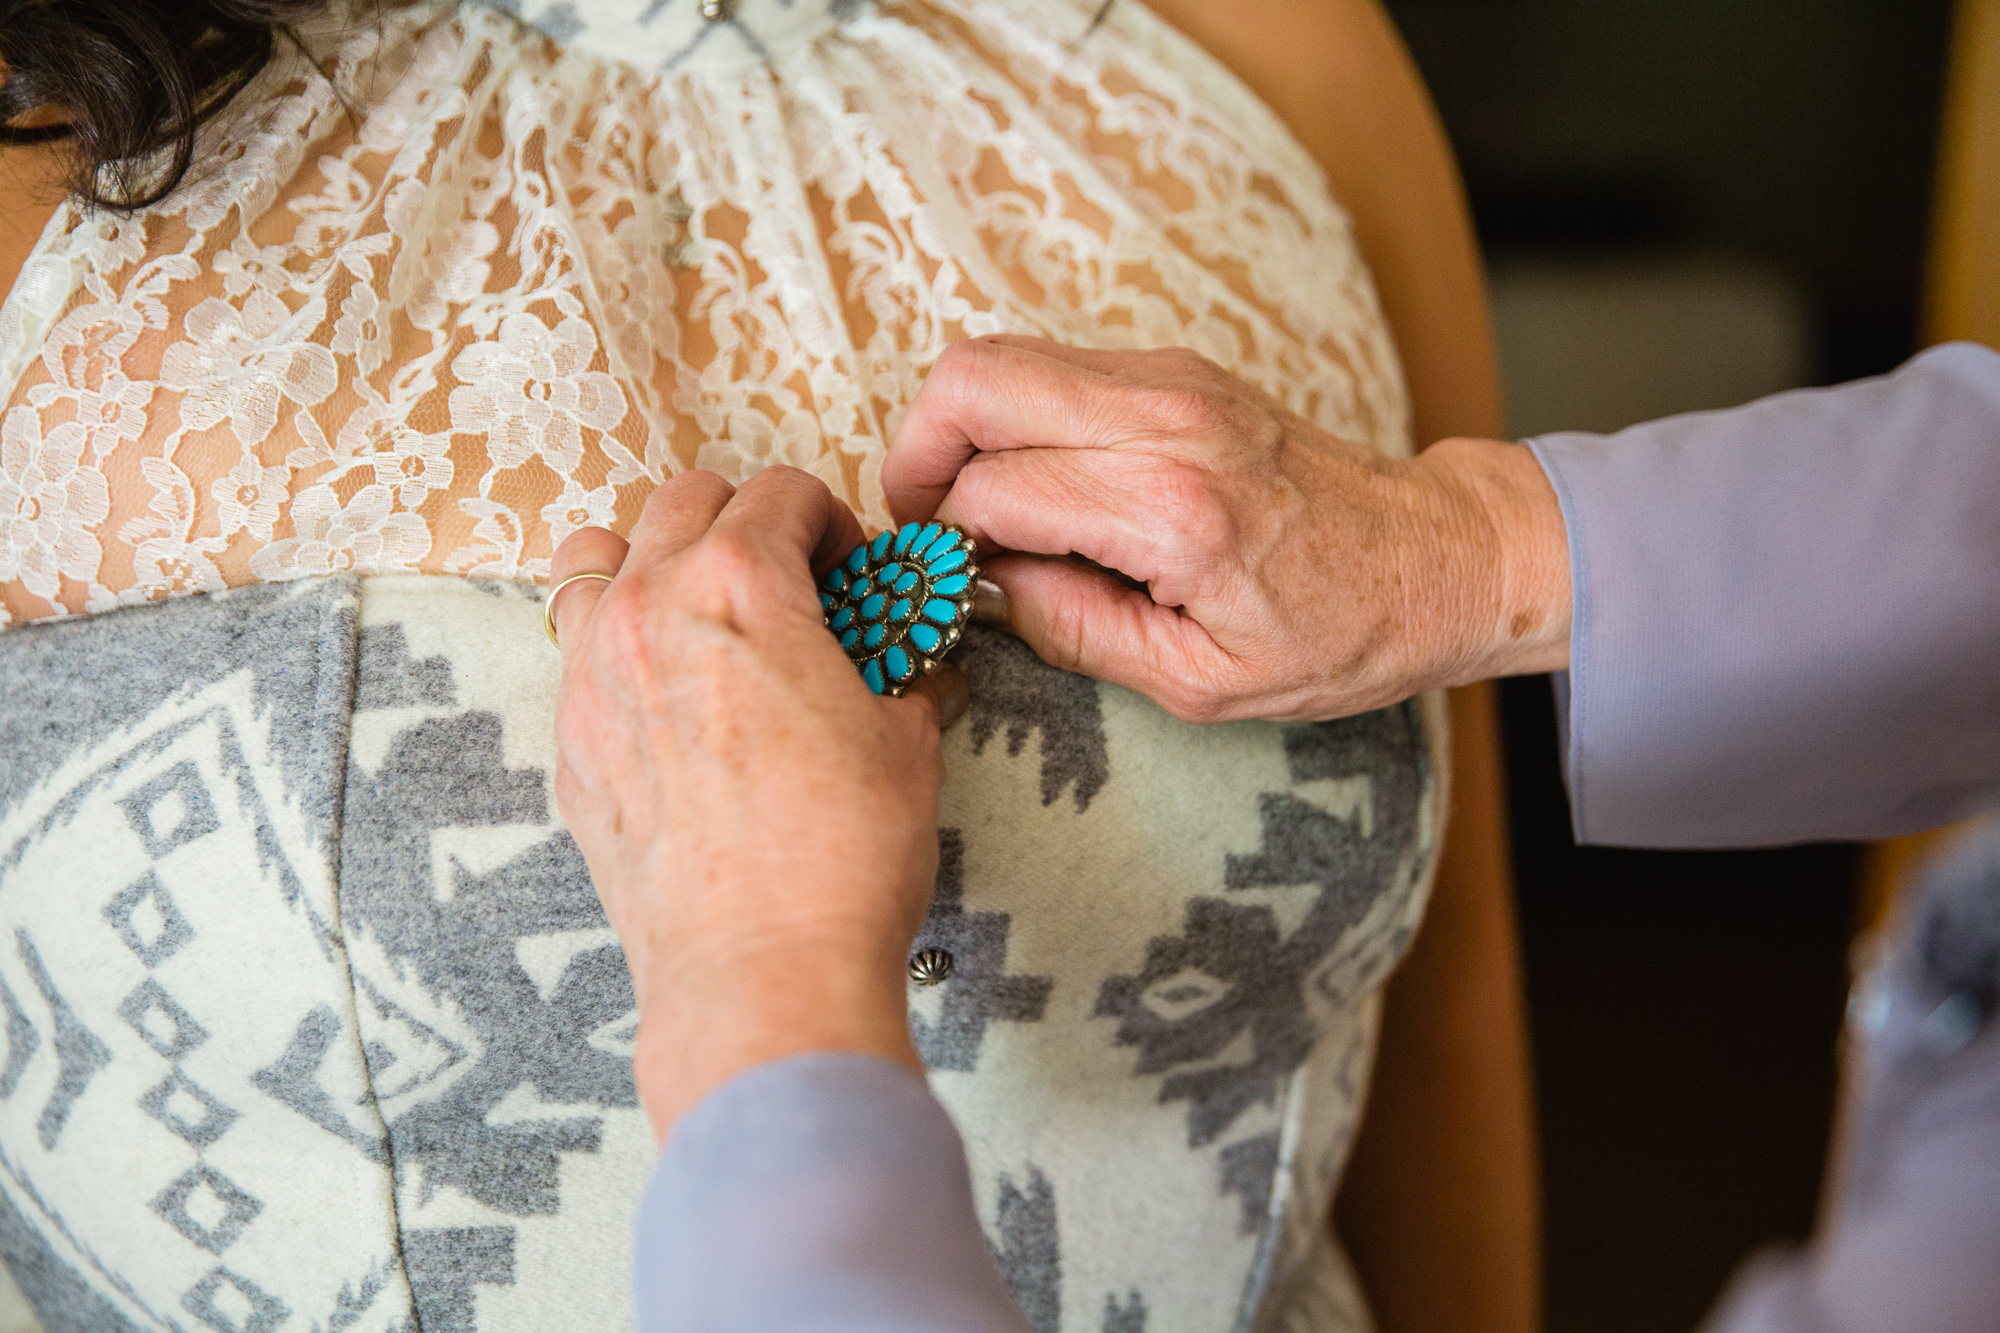 Mother of the bride pinning a turquoise broach on the bride's wedding dress by Phoenix wedding photographer PMA Photography.